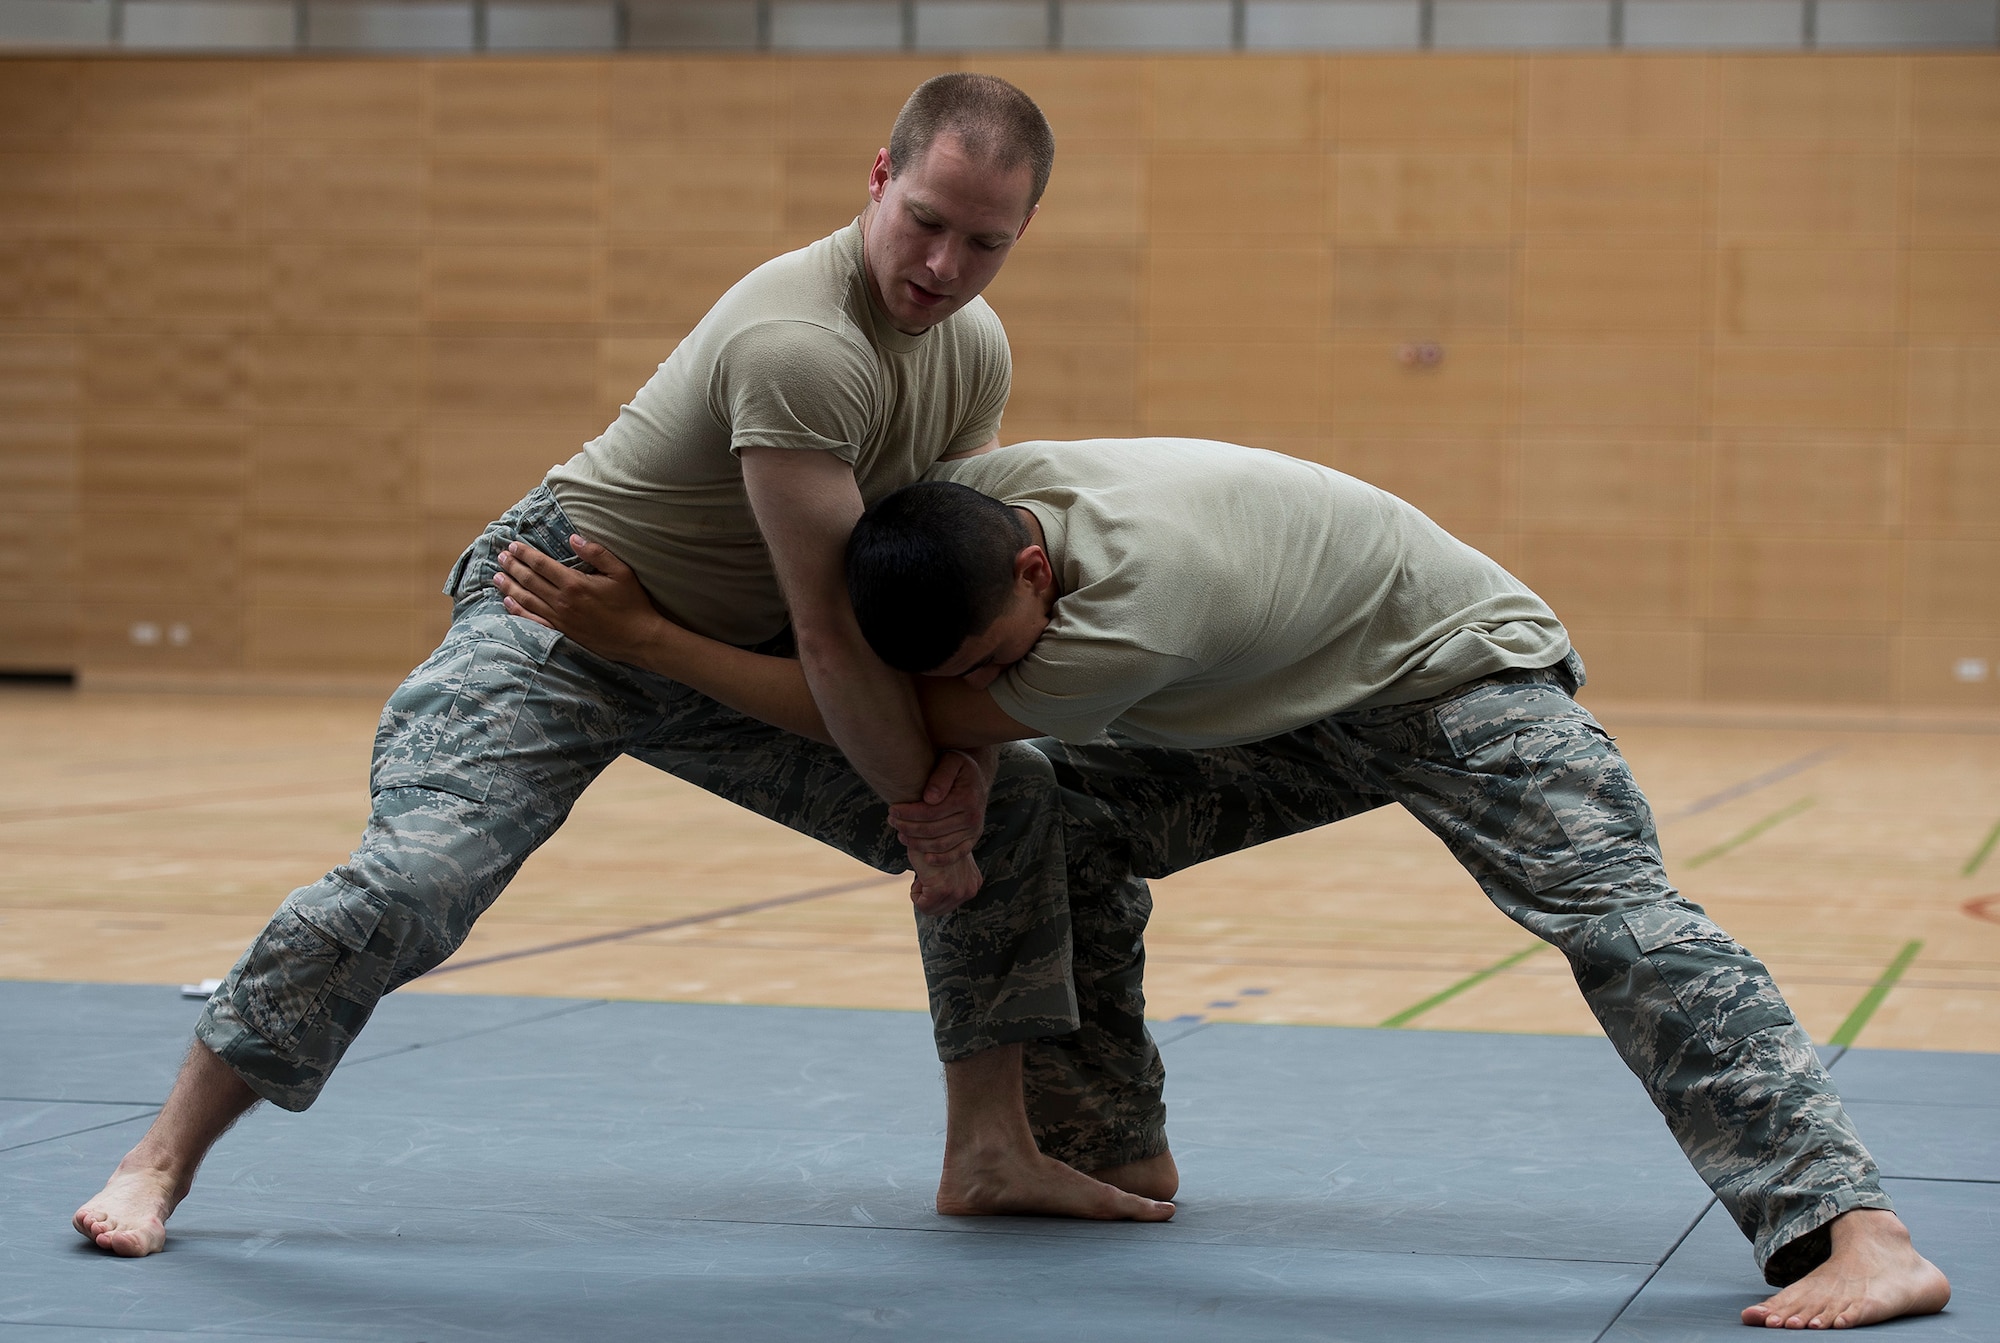 U.S. Air Force Senior Airman Erik Alter, 52nd Security Forces Squadron lead combatives instructor, demonstrates a technique to Airmen from the 52nd SFS during combatives training May 28, 2015 at the fitness center on Spangdahlem Air Base, Germany. Military law enforcement officers conduct regular hand-to-hand combat training to ensure they are prepared for any hostile suspects they might encounter. (U.S. Air Force photo by Staff Sgt. Chad Warren/Released)